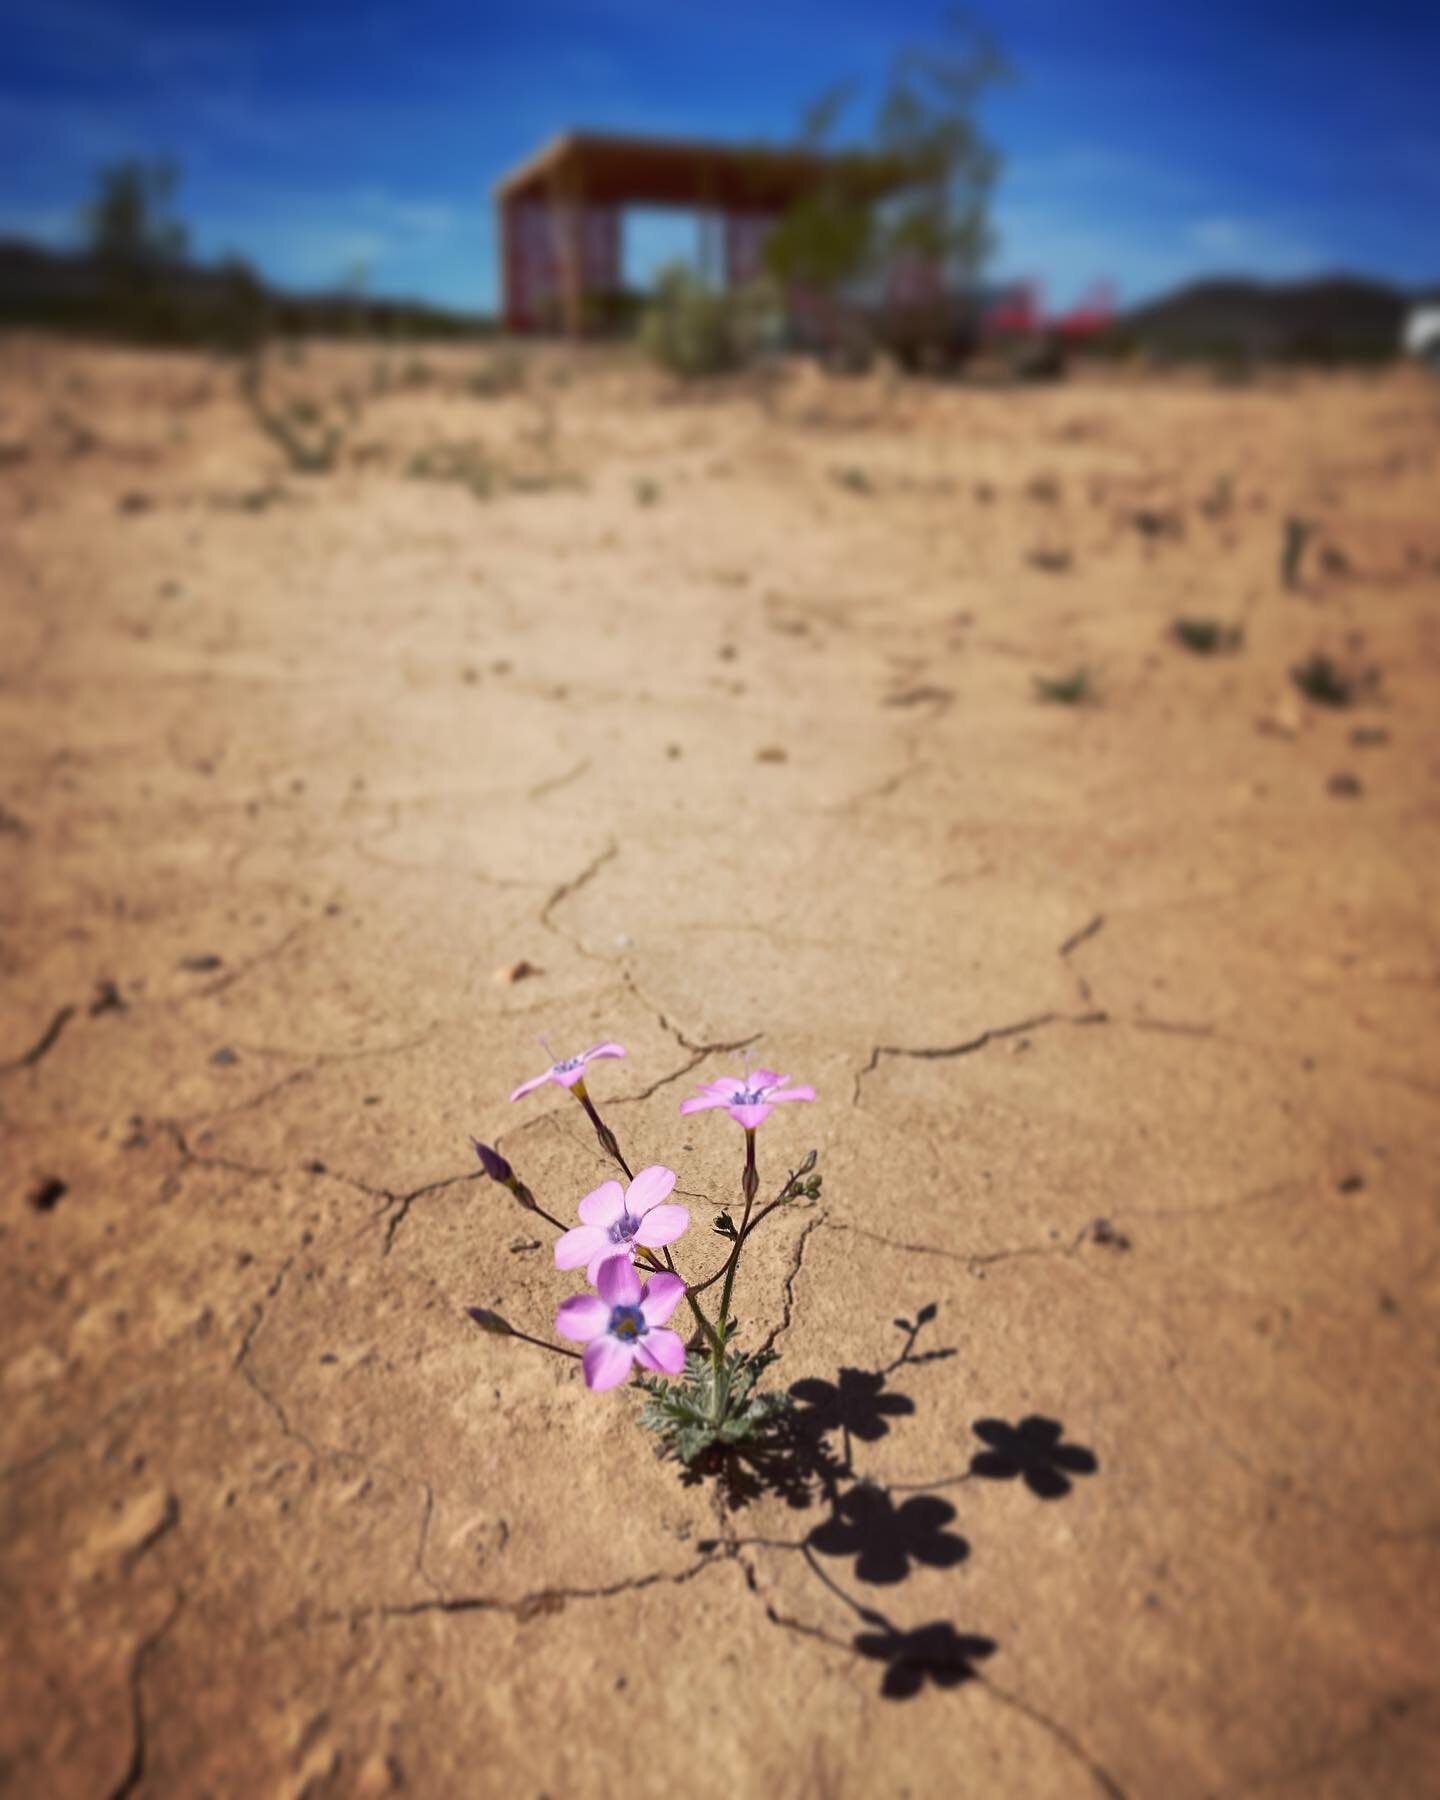 The Earth nurtures all wild and beautiful things🌸 Happy Earth Day from Cherry Cloud&rsquo;s first superbloom!😜🥰

#earthday 
#deathvalley 
#superbloom
#desertwildflowers 
#cherrycloudsoasis 
#deathvalleysuperbloom